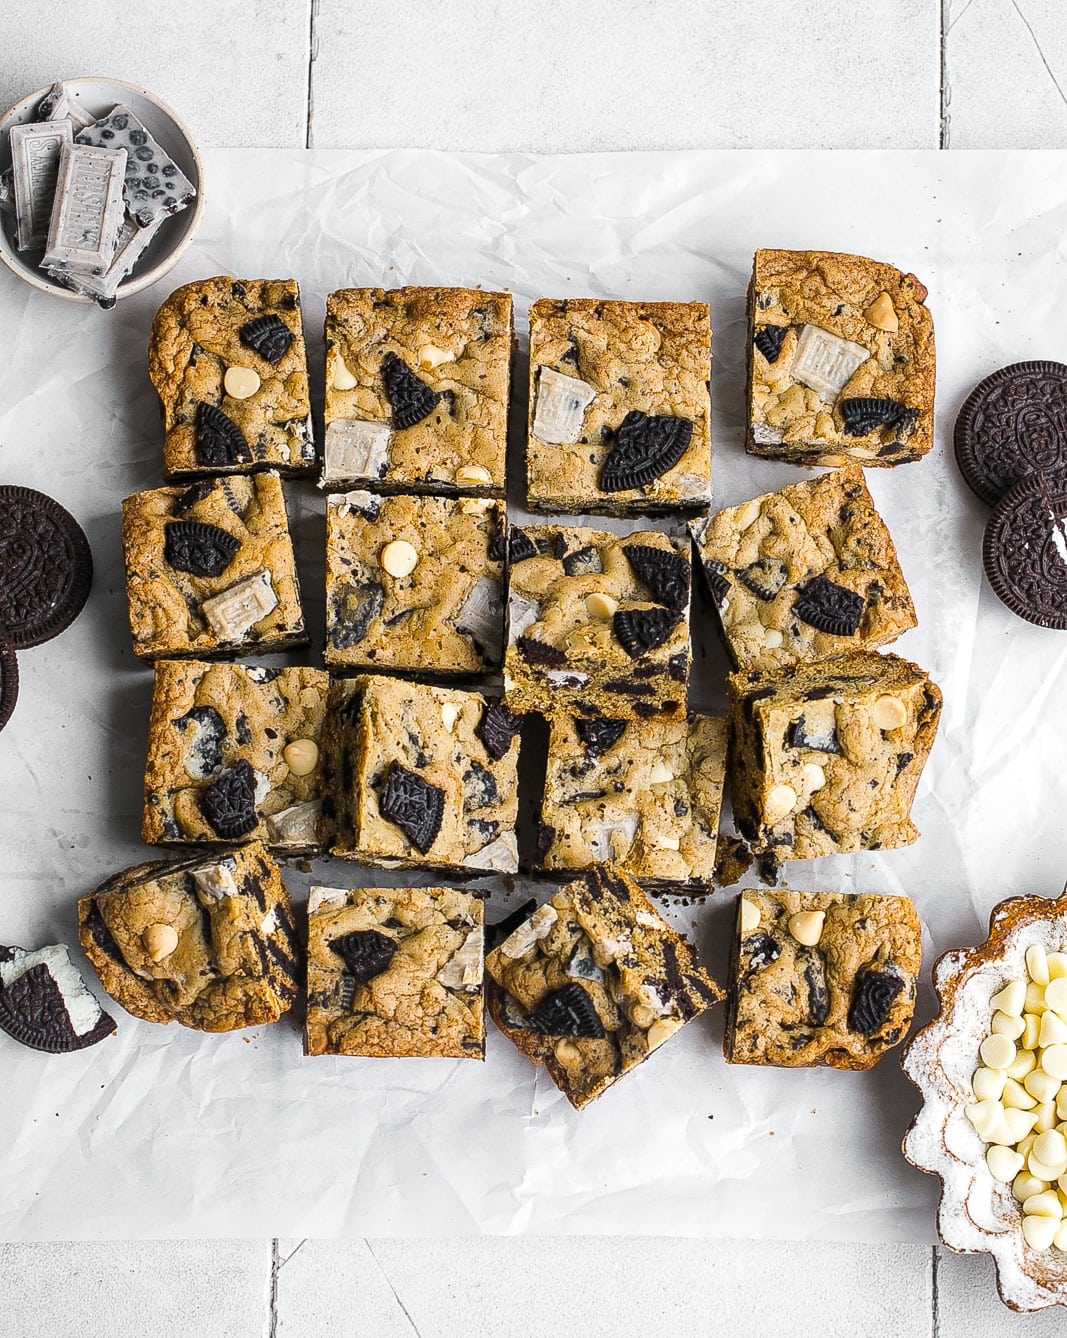 Oreo bars cut into squares on parchment paper.